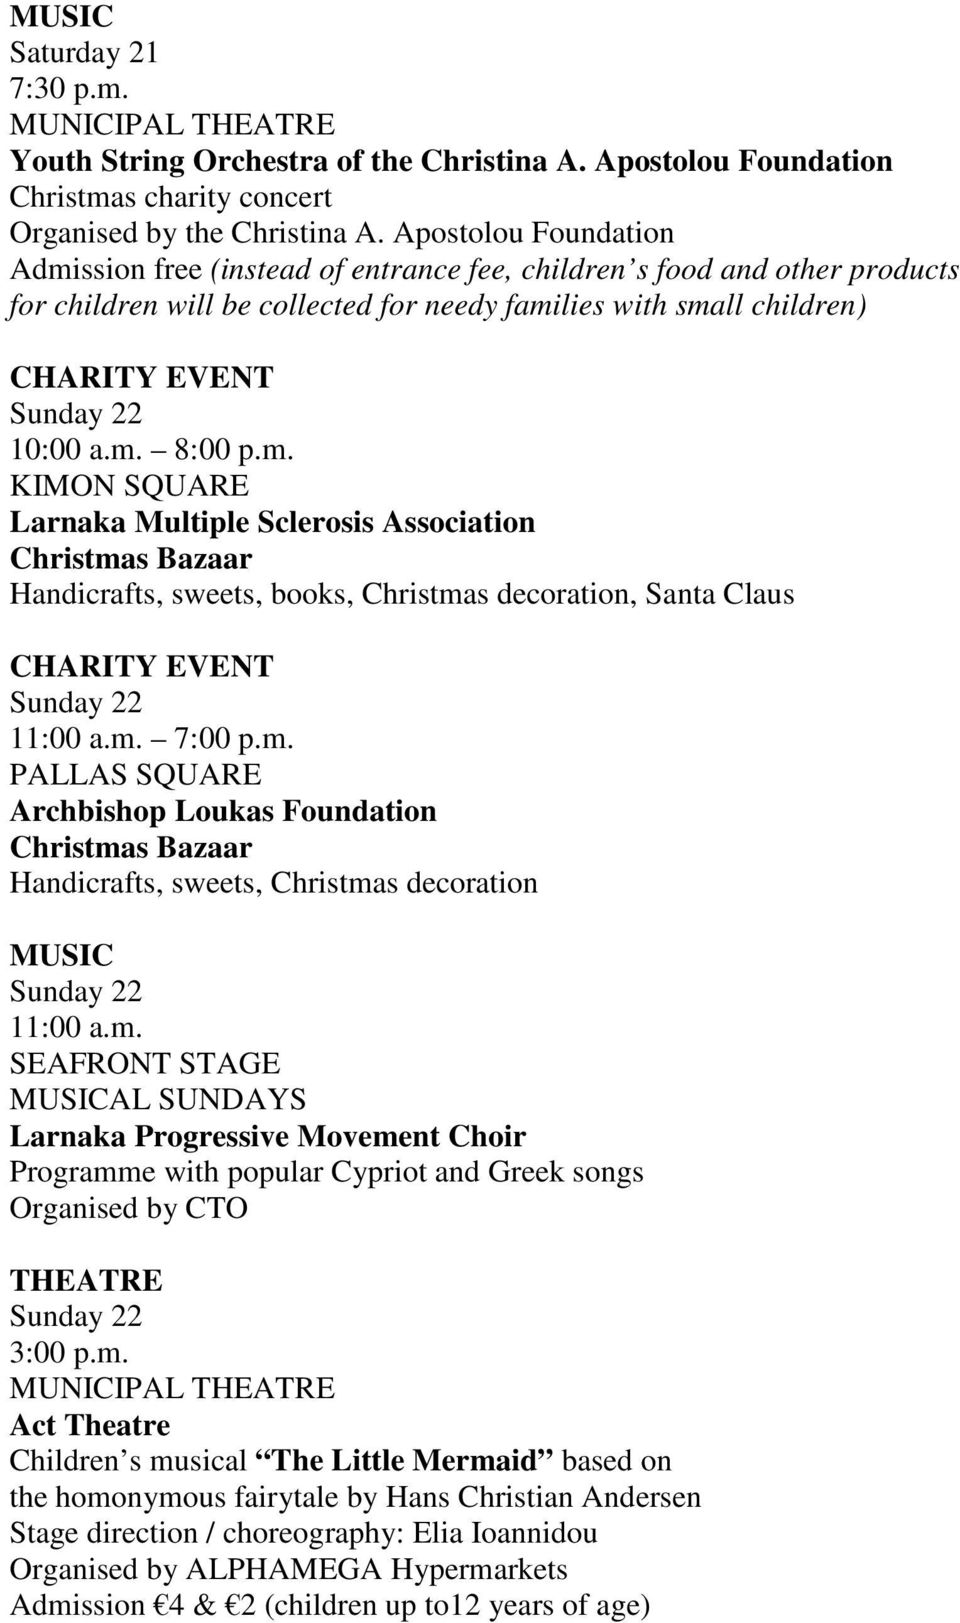 m. 7:00 p.m. PALLAS SQUARE Archbishop Loukas Foundation Christmas Bazaar Handicrafts, sweets, Christmas decoration Sunday 22 11:00 a.m. SEAFRONT STAGE AL SUNDAYS Larnaka Progressive Movement Choir Programme with popular Cypriot and Greek songs Organised by CTO THEATRE Sunday 22 3:00 p.